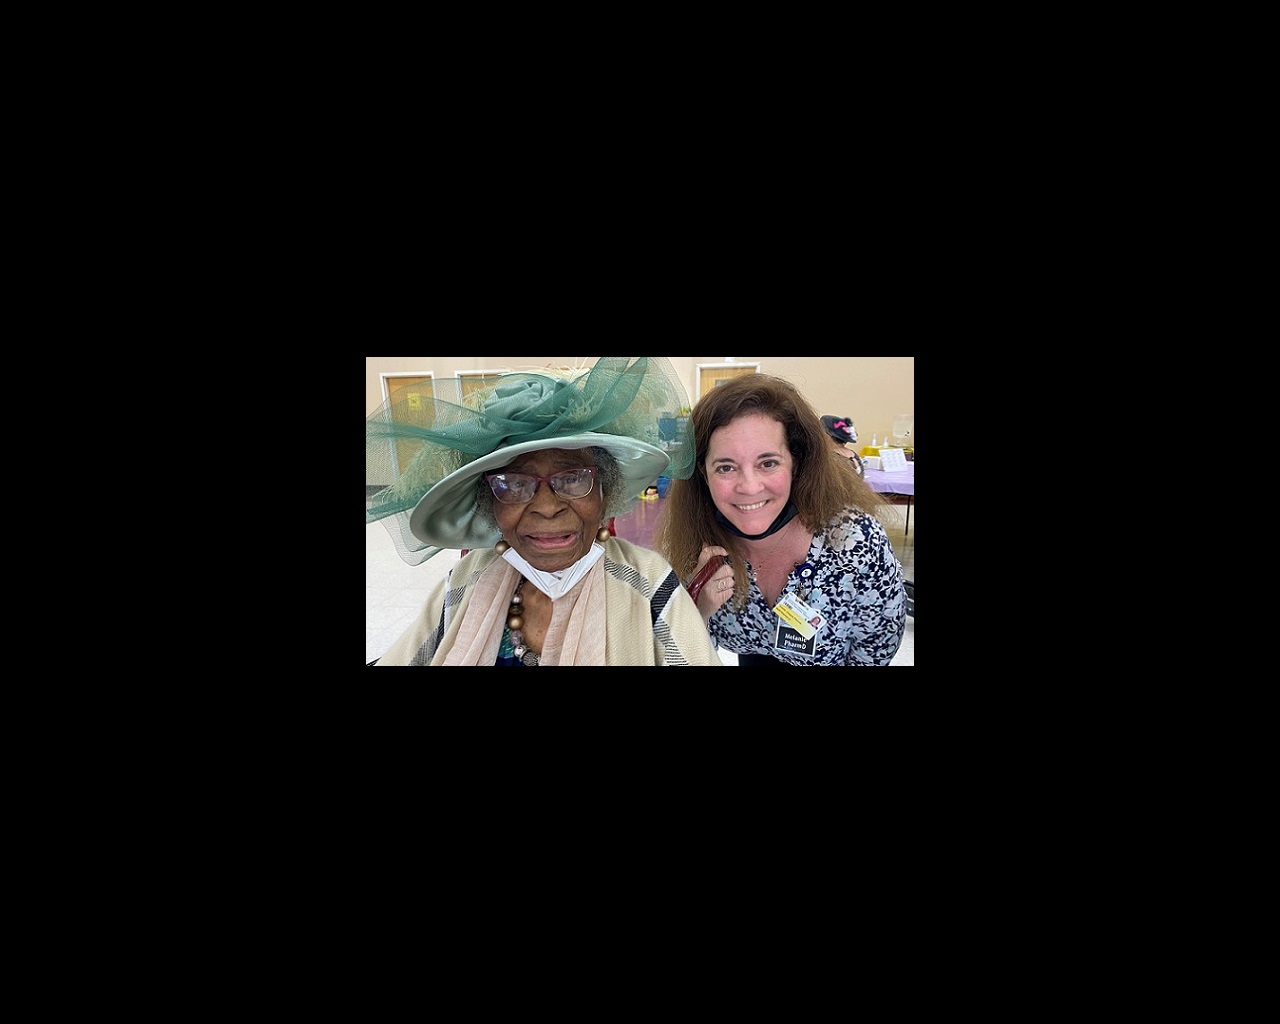 Two women smile for the camera. One is Beulah Jackson, in a green hat. The other is PharmD Melanie Chapple.